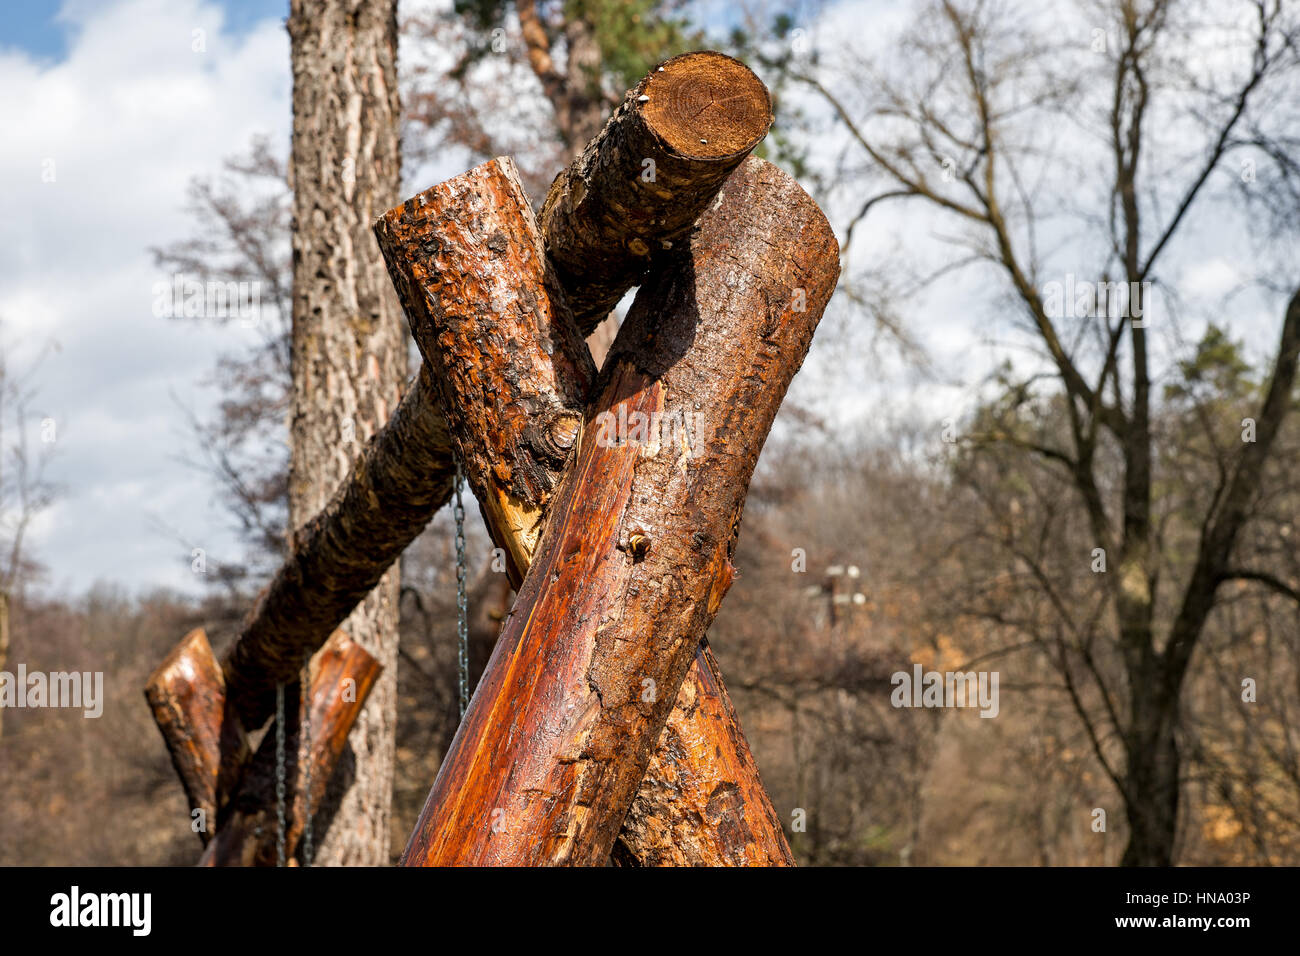 Wooden structure for a swing details Stock Photo